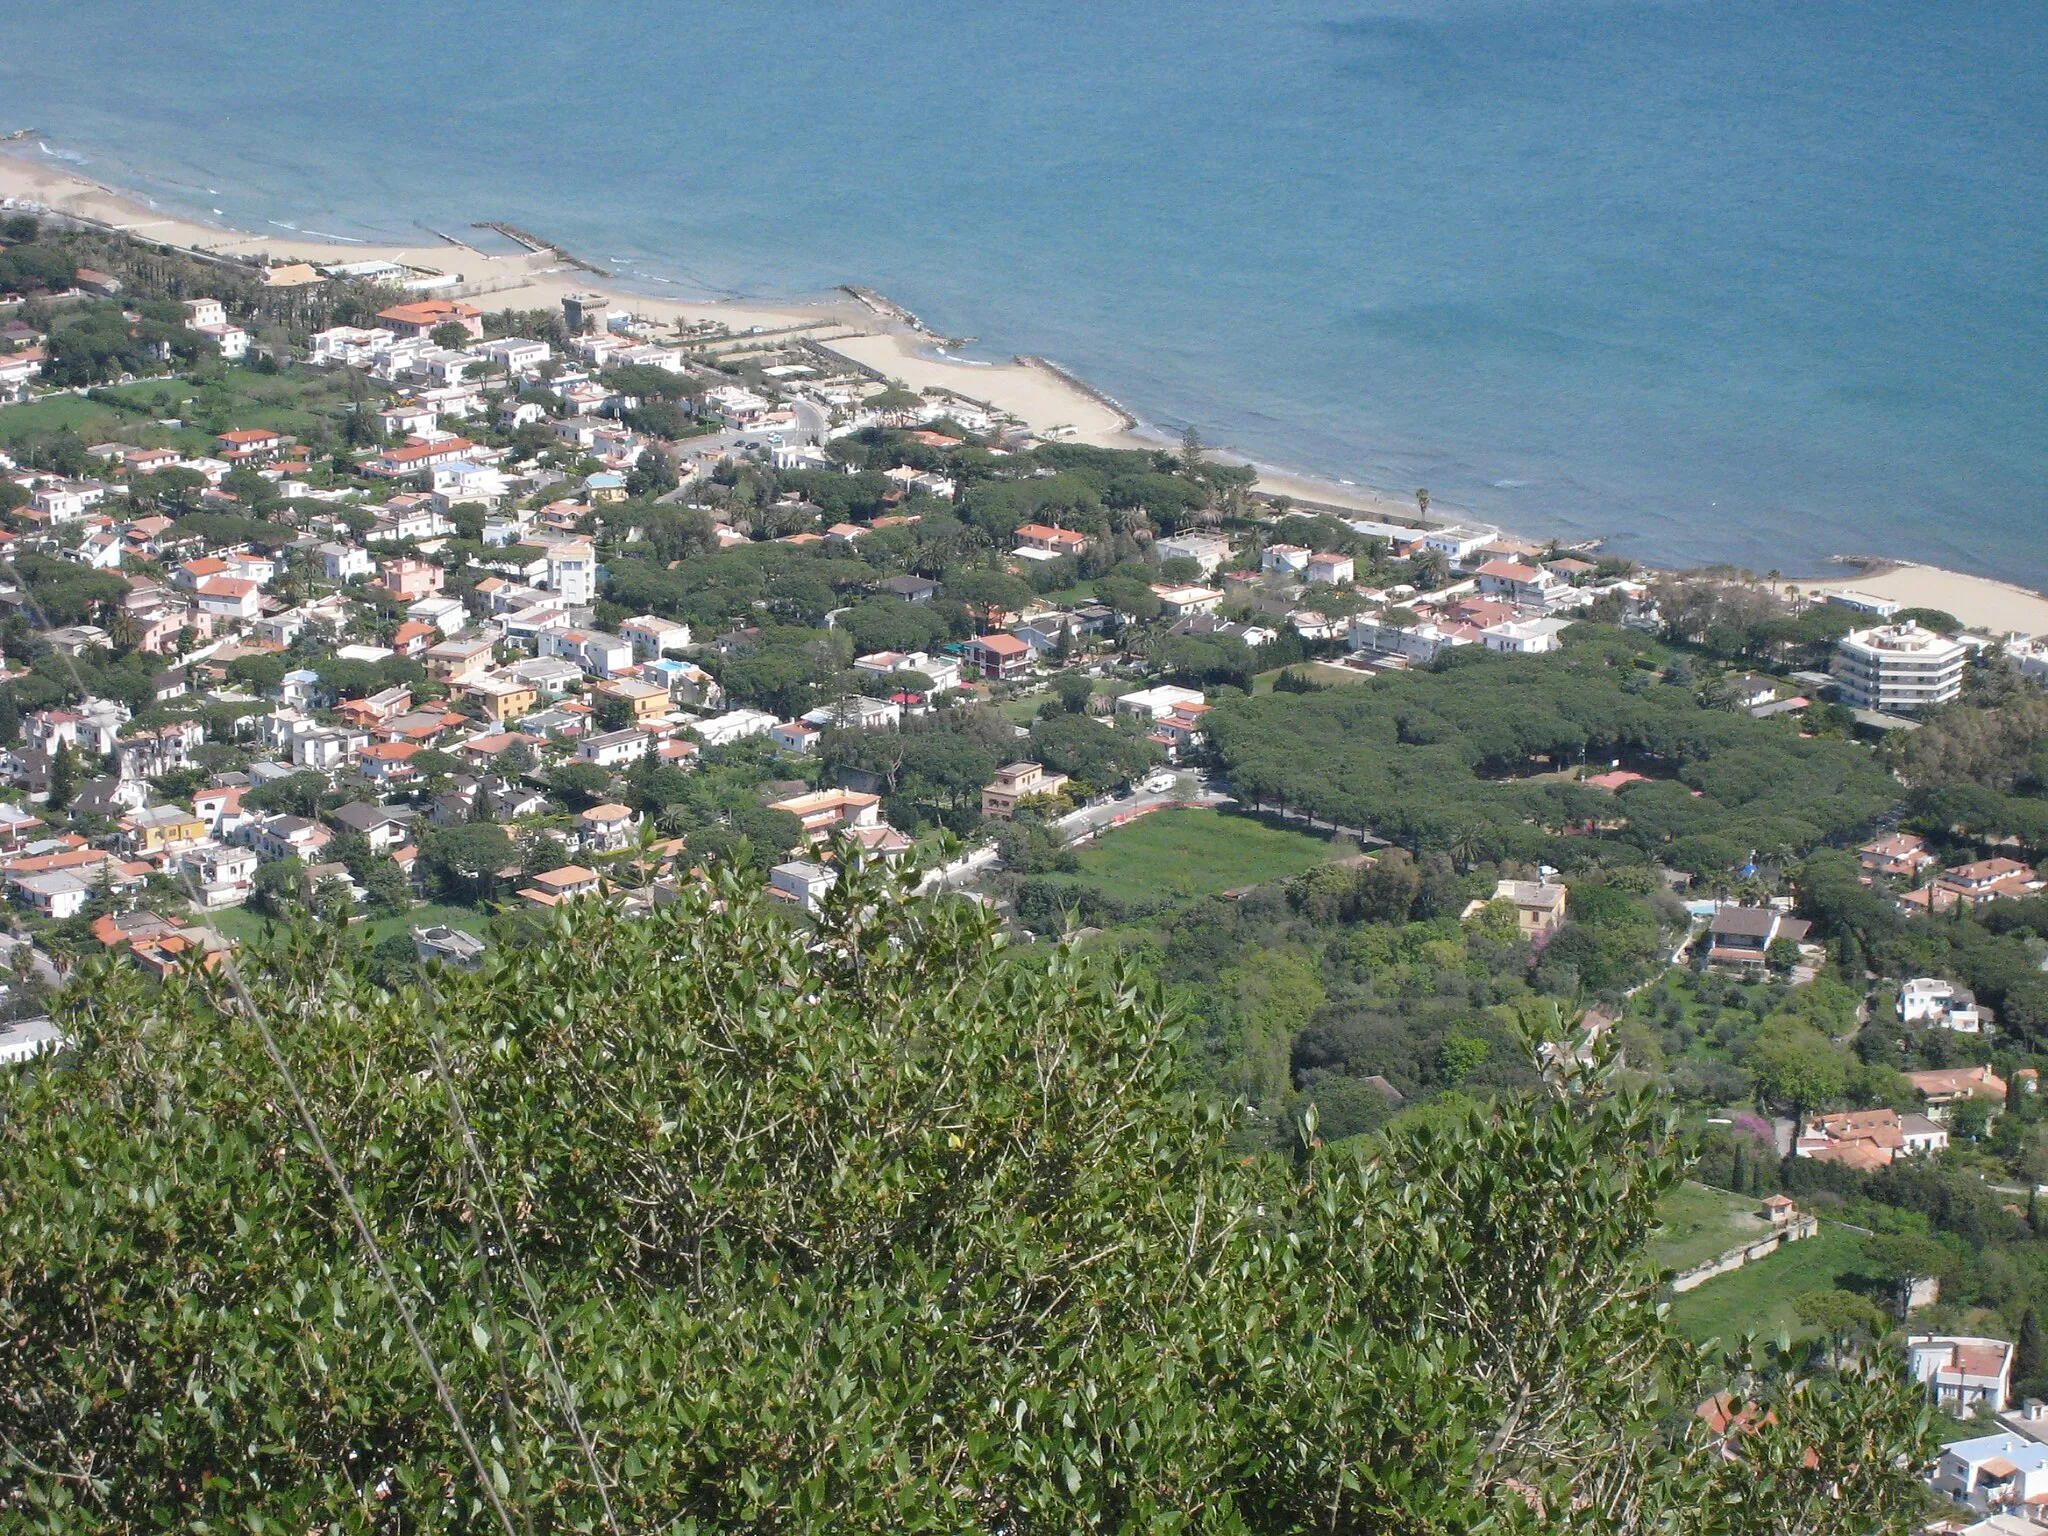 Photo showing: 04017 San Felice Circeo, Province of Latina, Italy